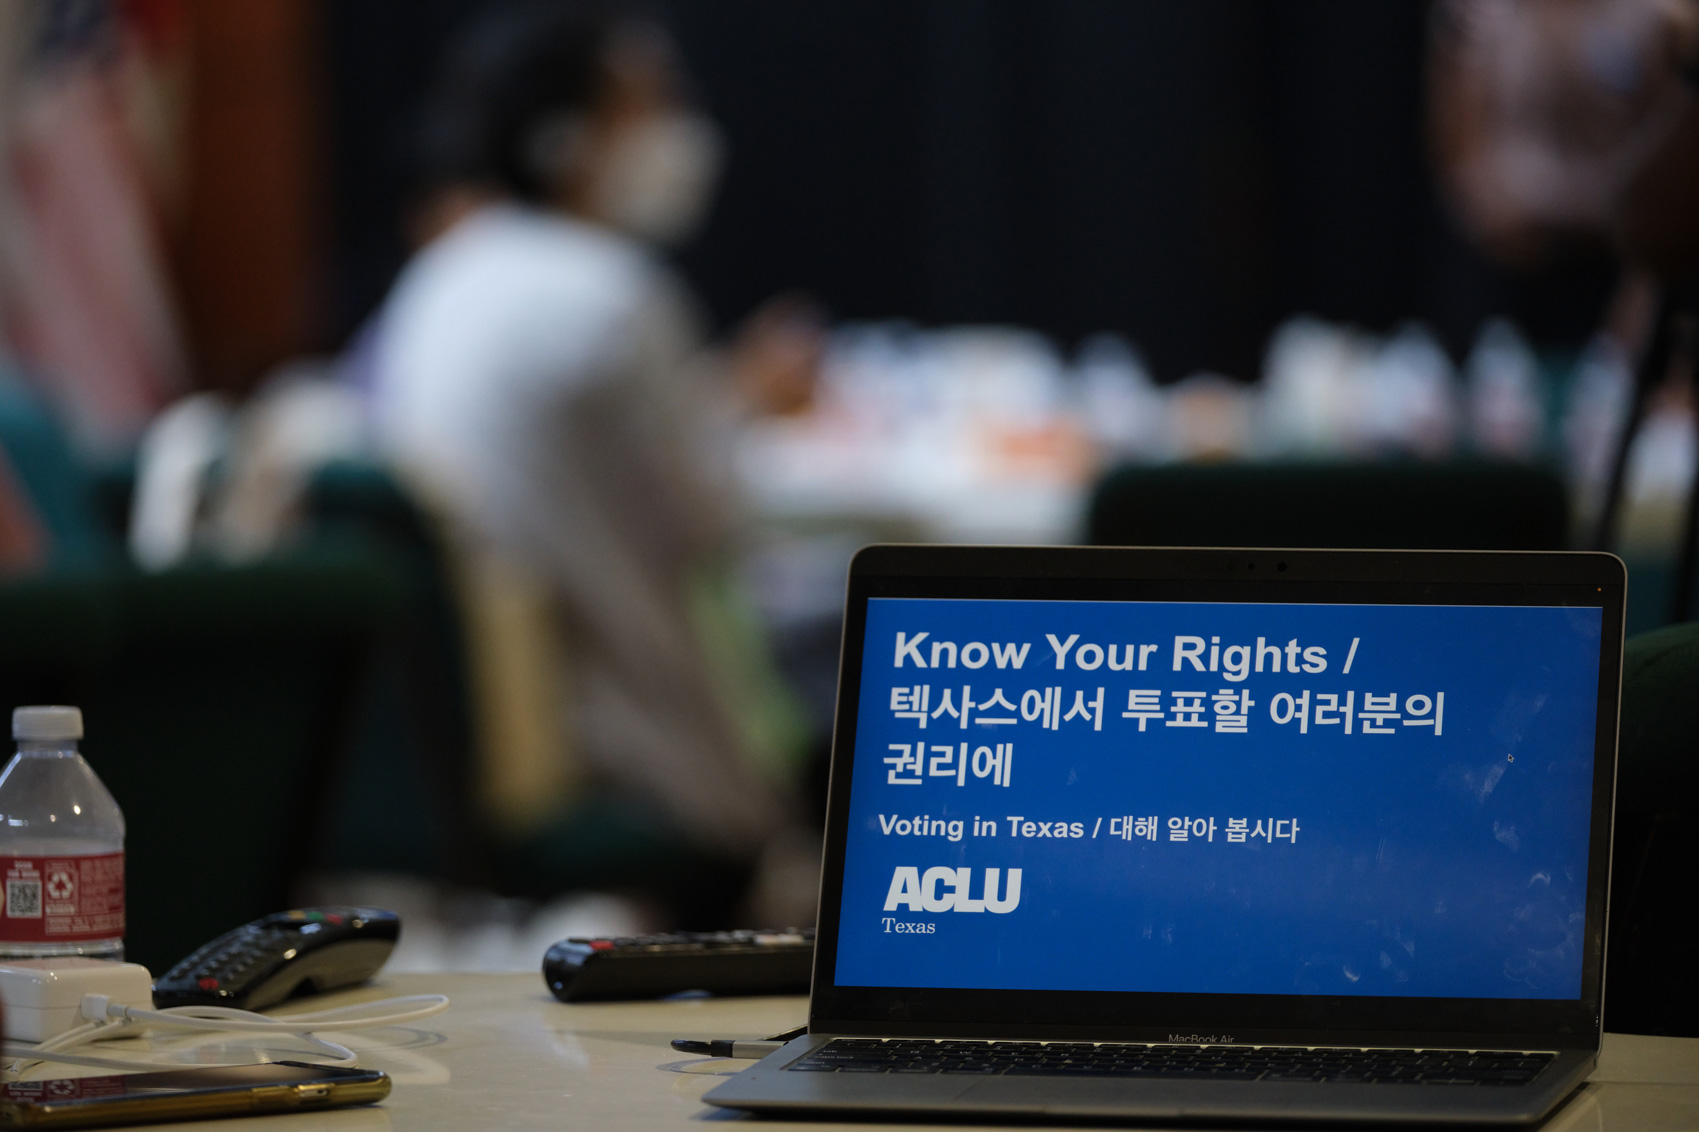 The Texas ACLU was on hand to explain voting rights at a forum at the Korean Community Center,